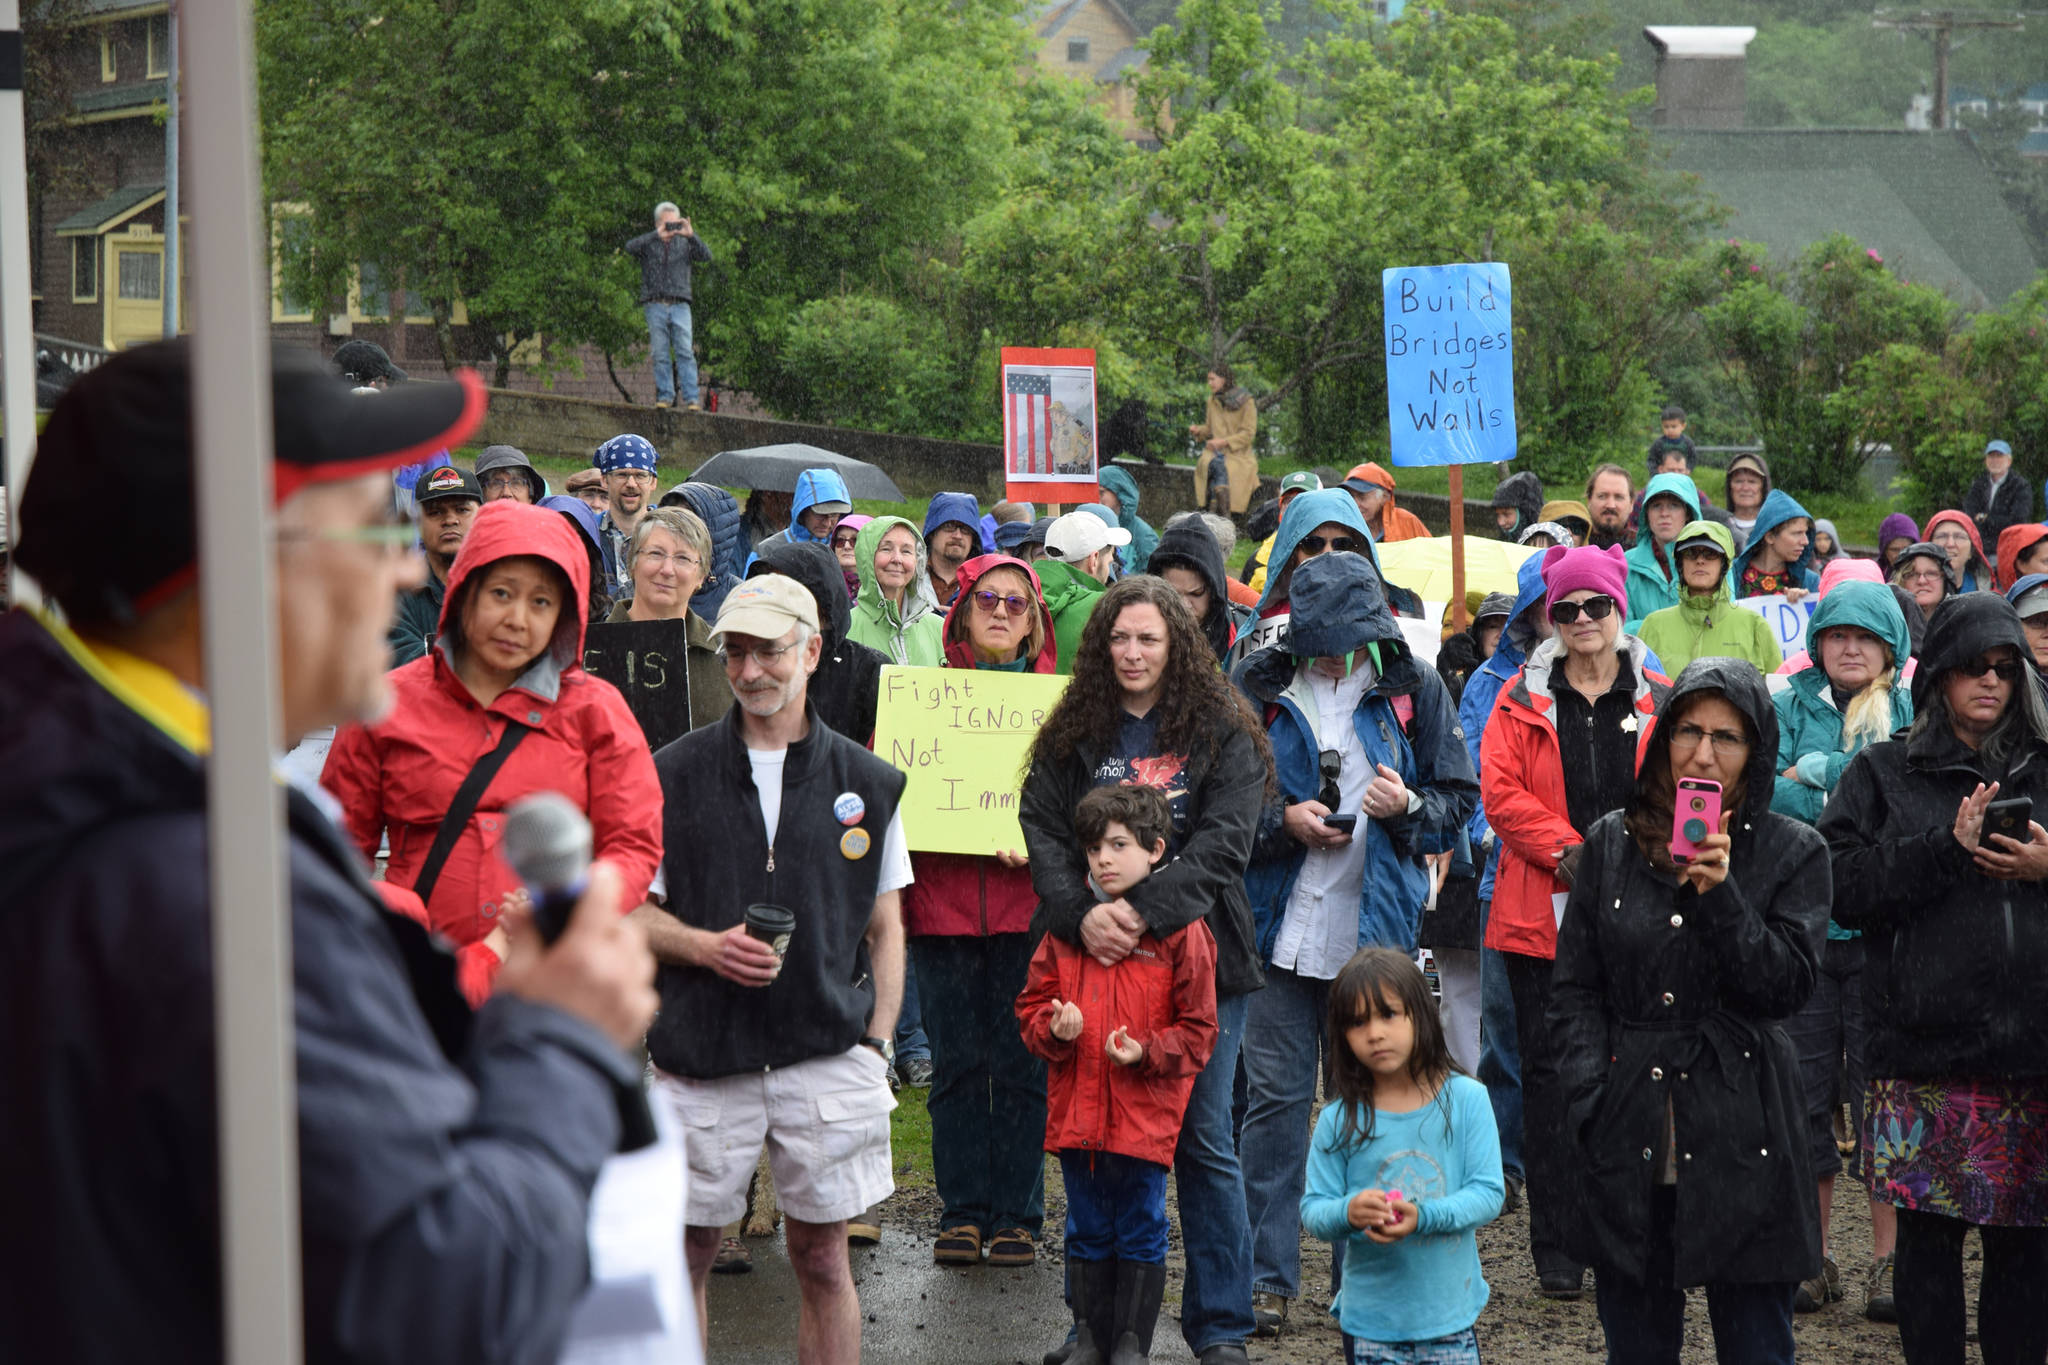 Mansour Sadeghi speaks to a crowd of protestors Saturday at Capital Park during a rally against family separation at the U.S. southern border. (Kevin Gullufsen | Juneau Empire)